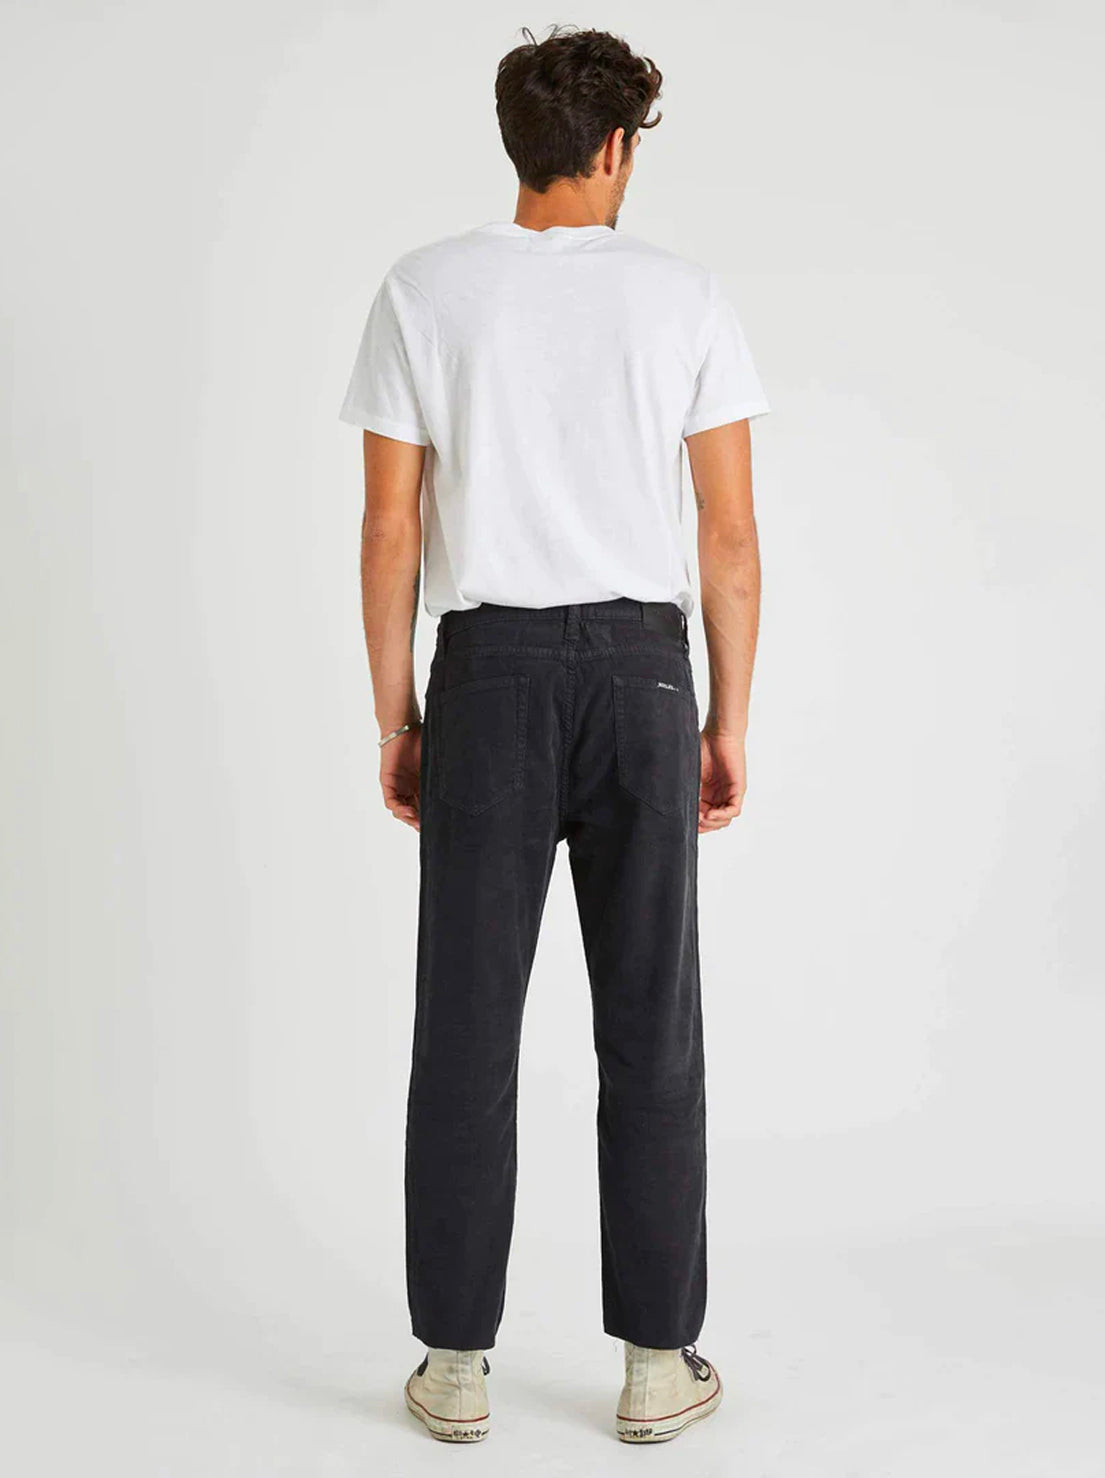 Rolla's - Relaxo Pant - Black Cord